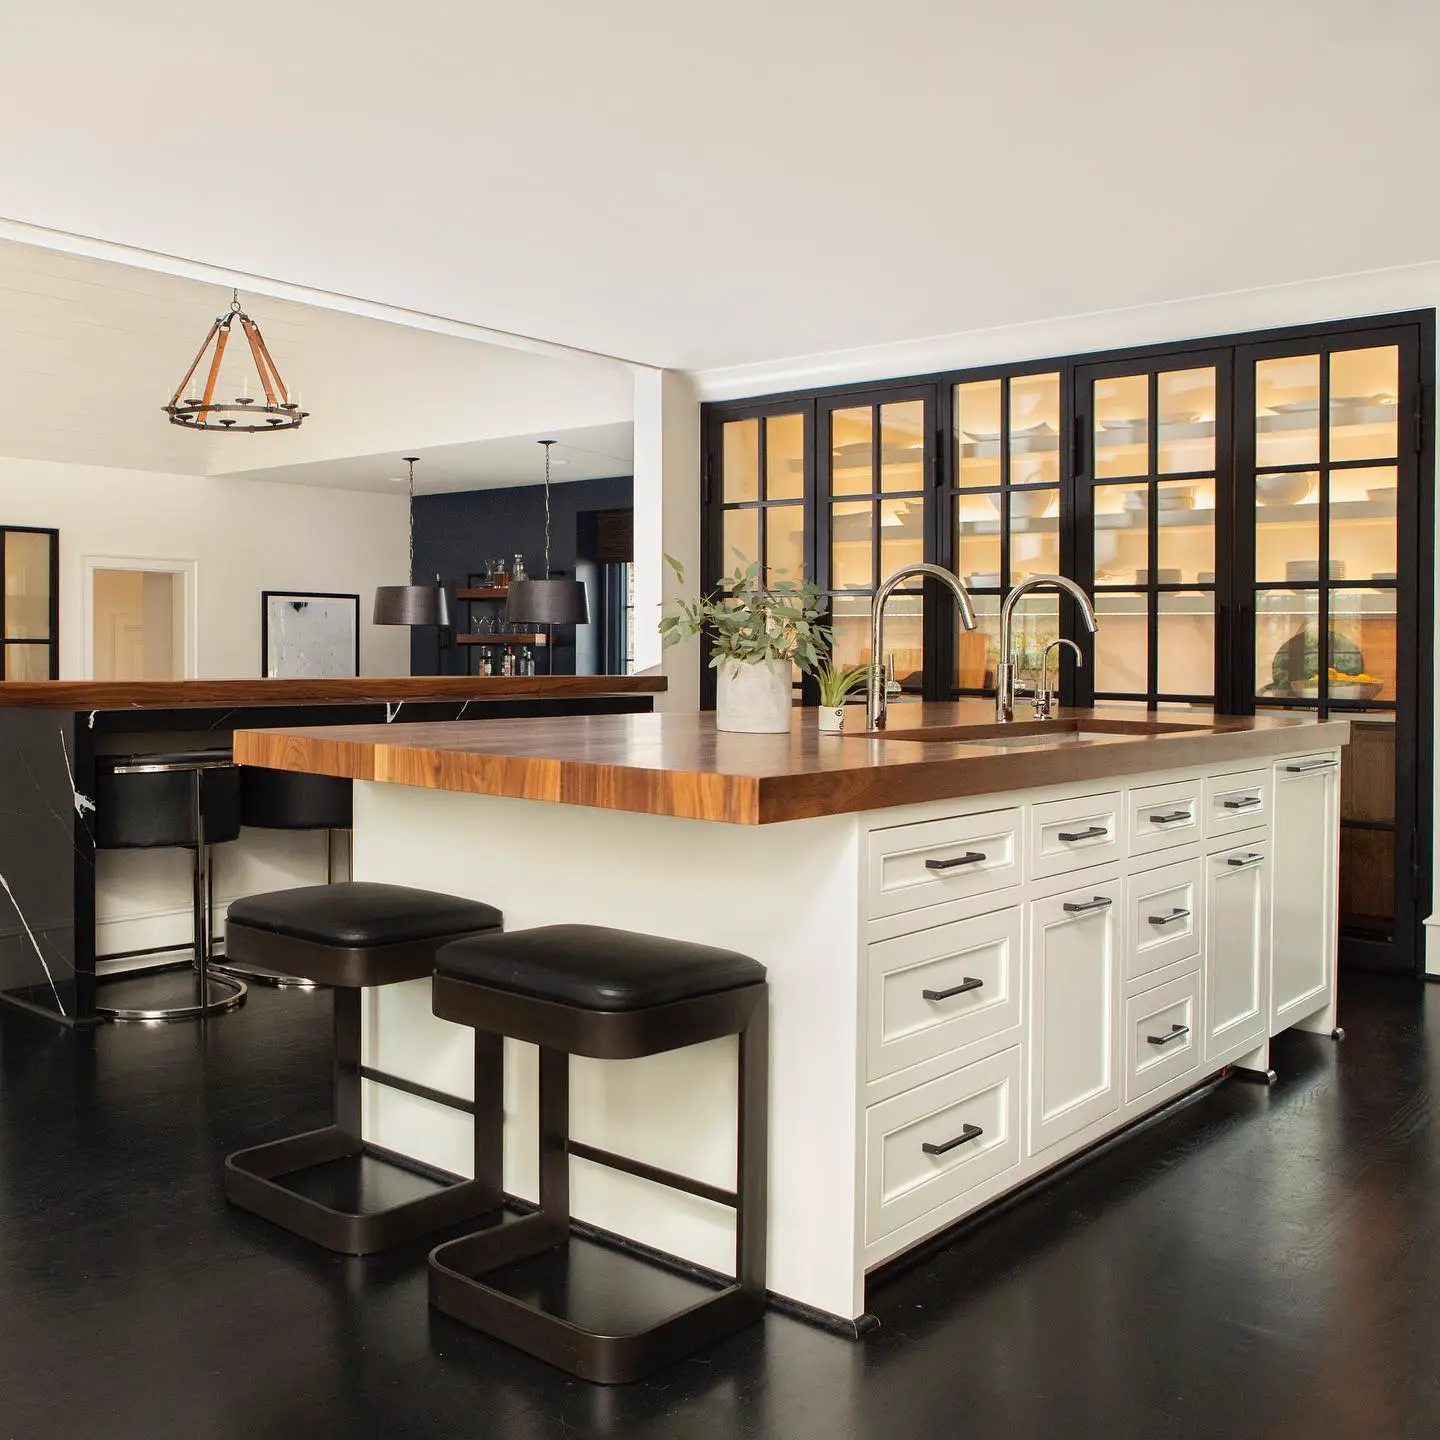 A kitchen with a large island and stools featuring a black kitchen floor.